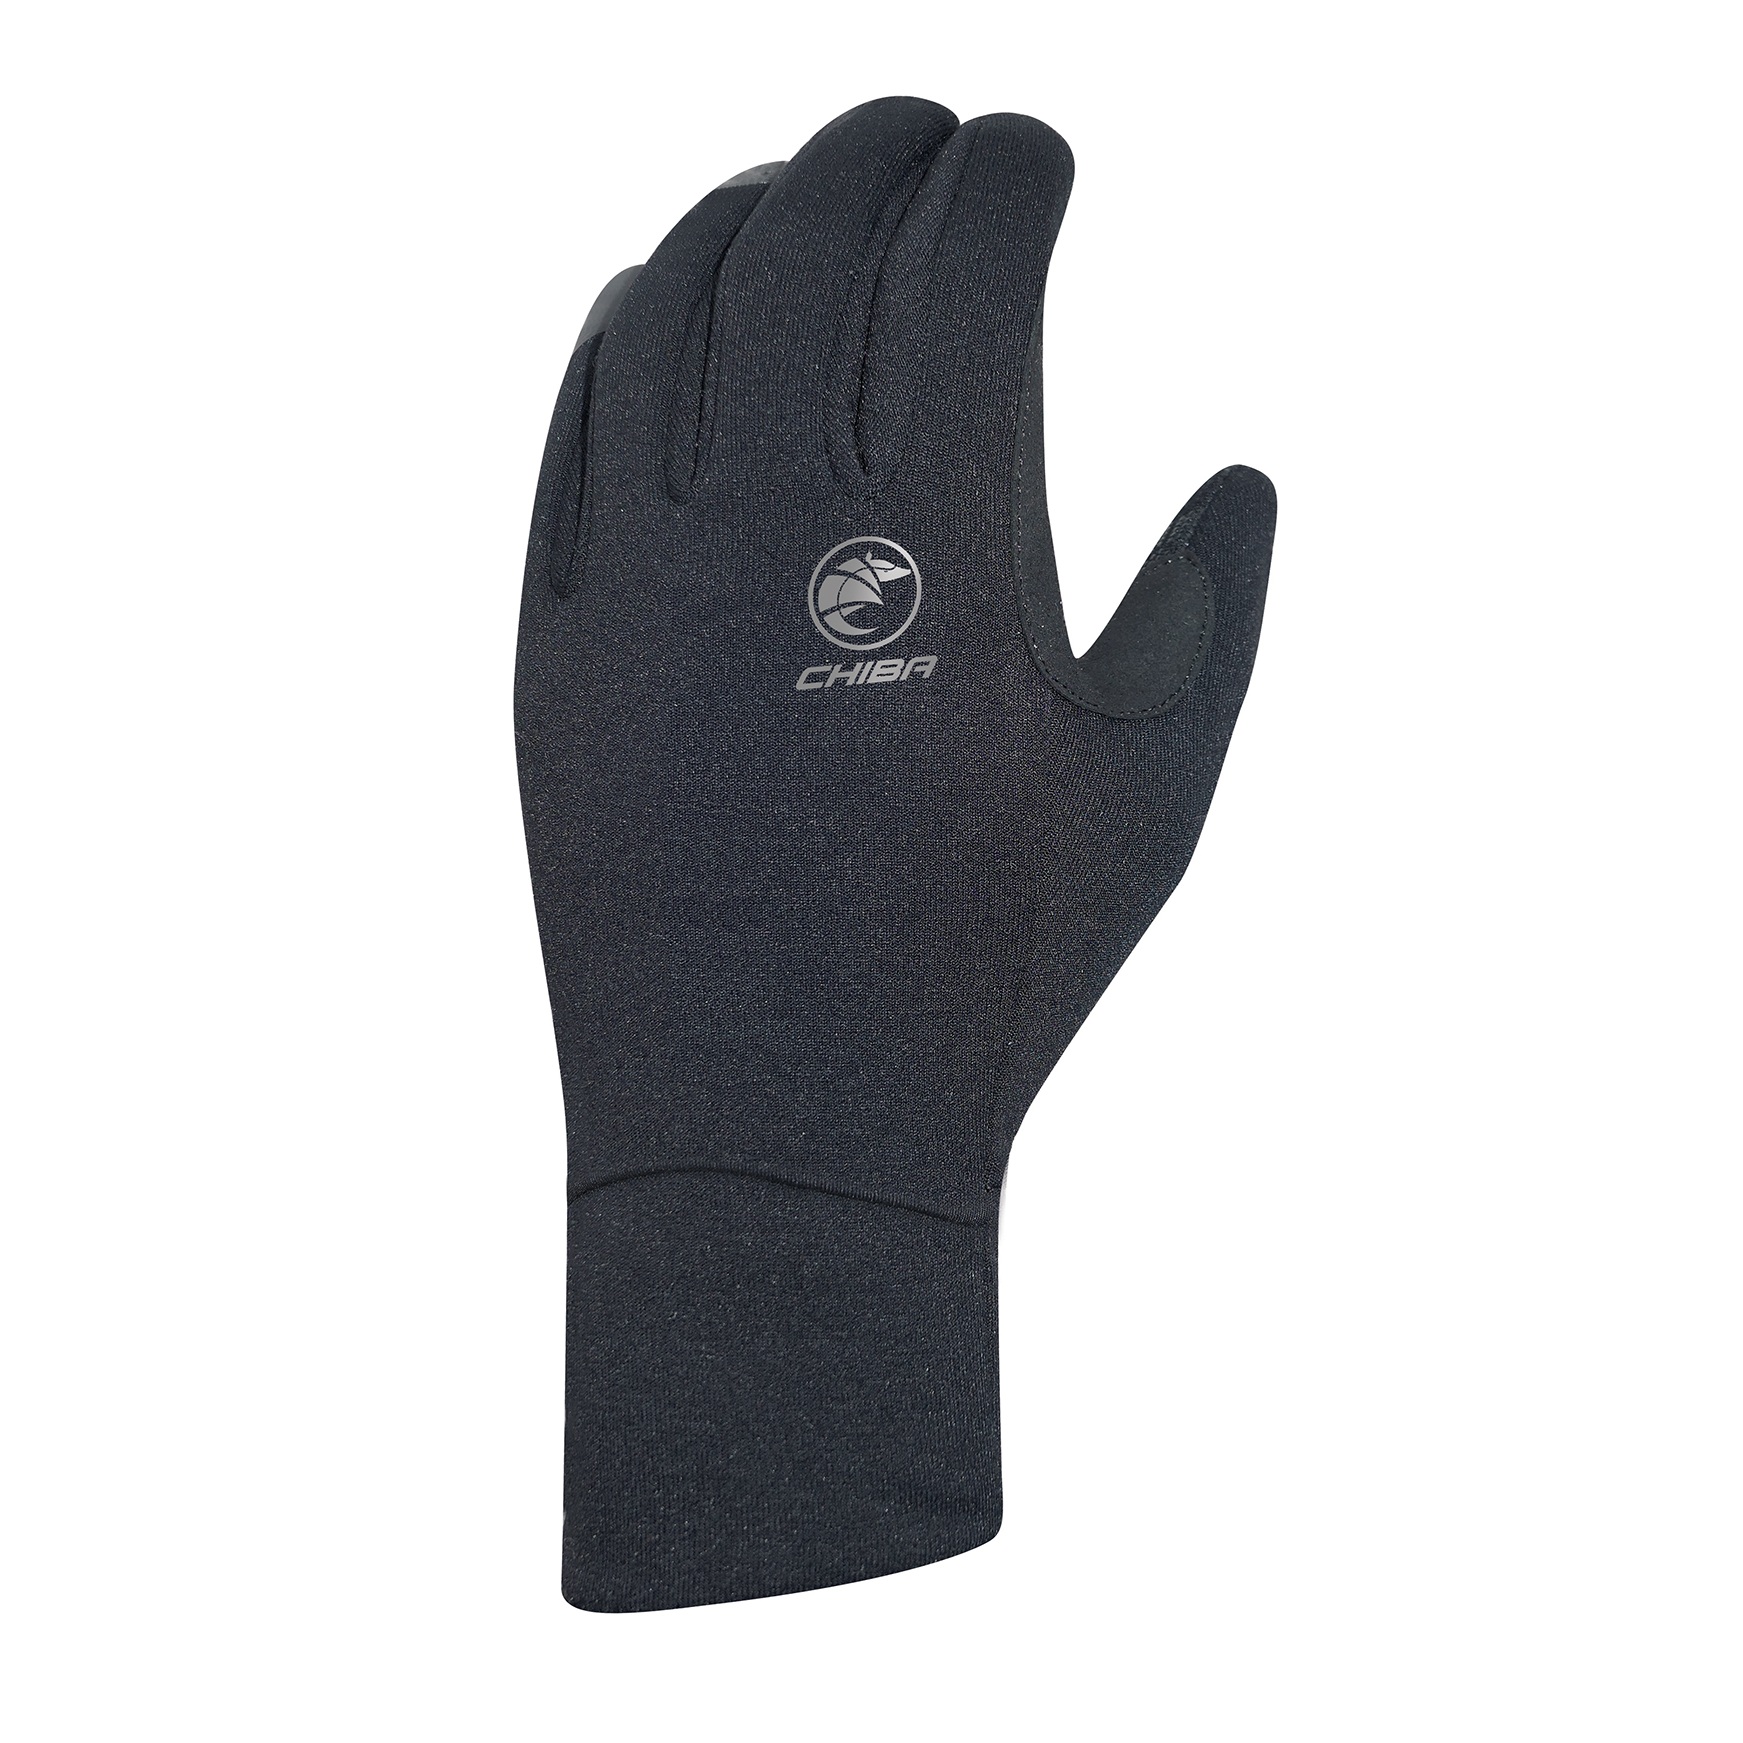 Picture of Chiba Polarfleece Cycling Gloves Kids - black 3160120